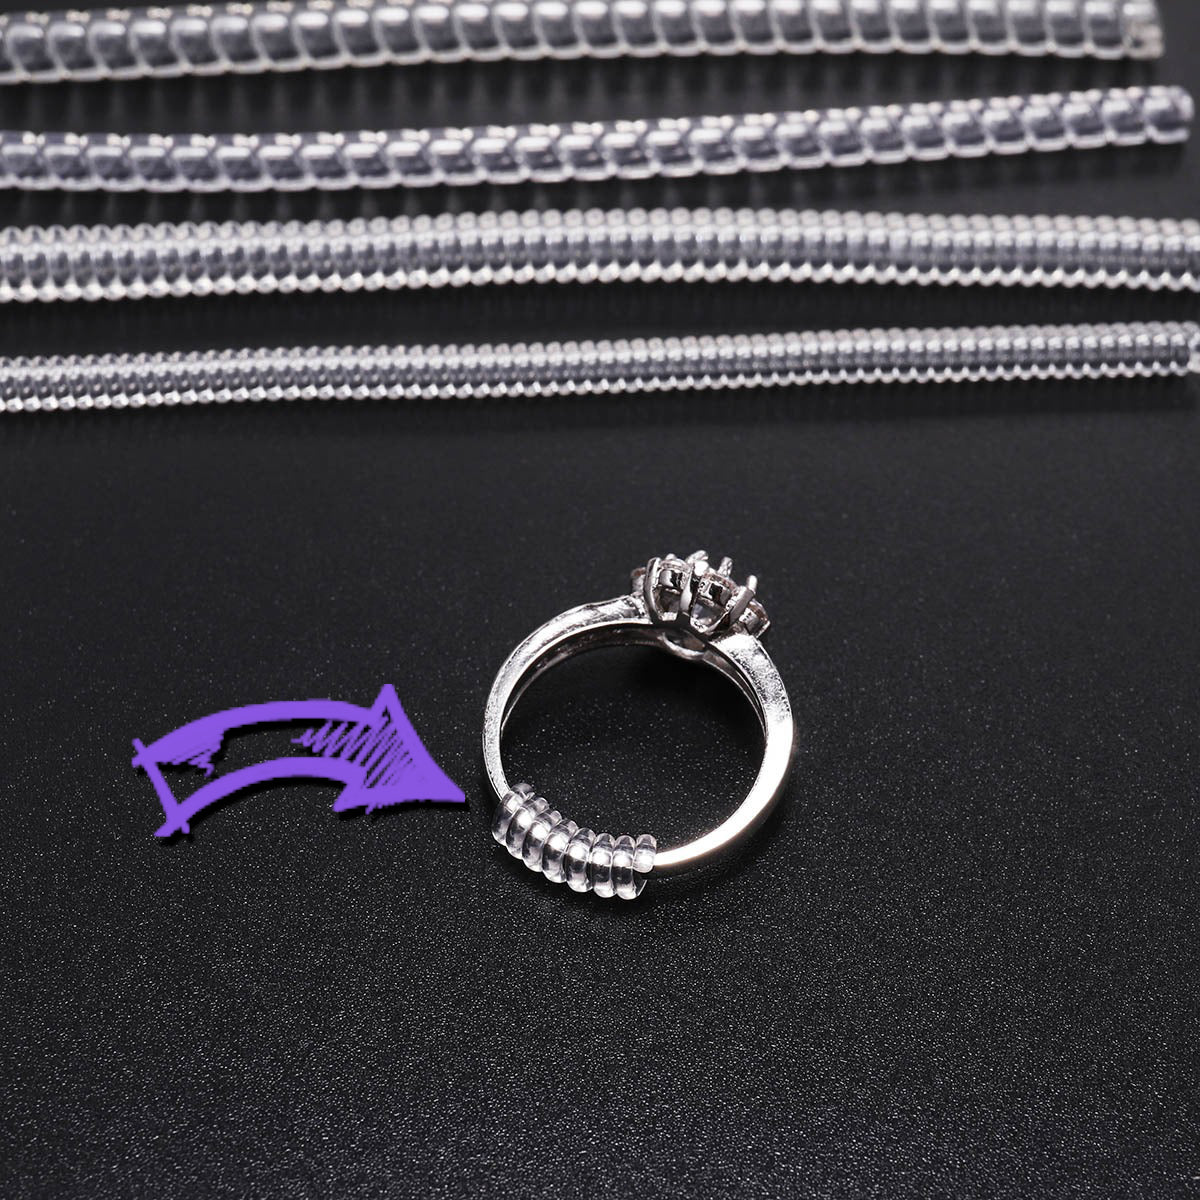 Ring Size Adjuster - Spiral - A small coil of PVC designed to be wrapped around the underside of a ring to make a large ring fit more closely to the wearer's finger.